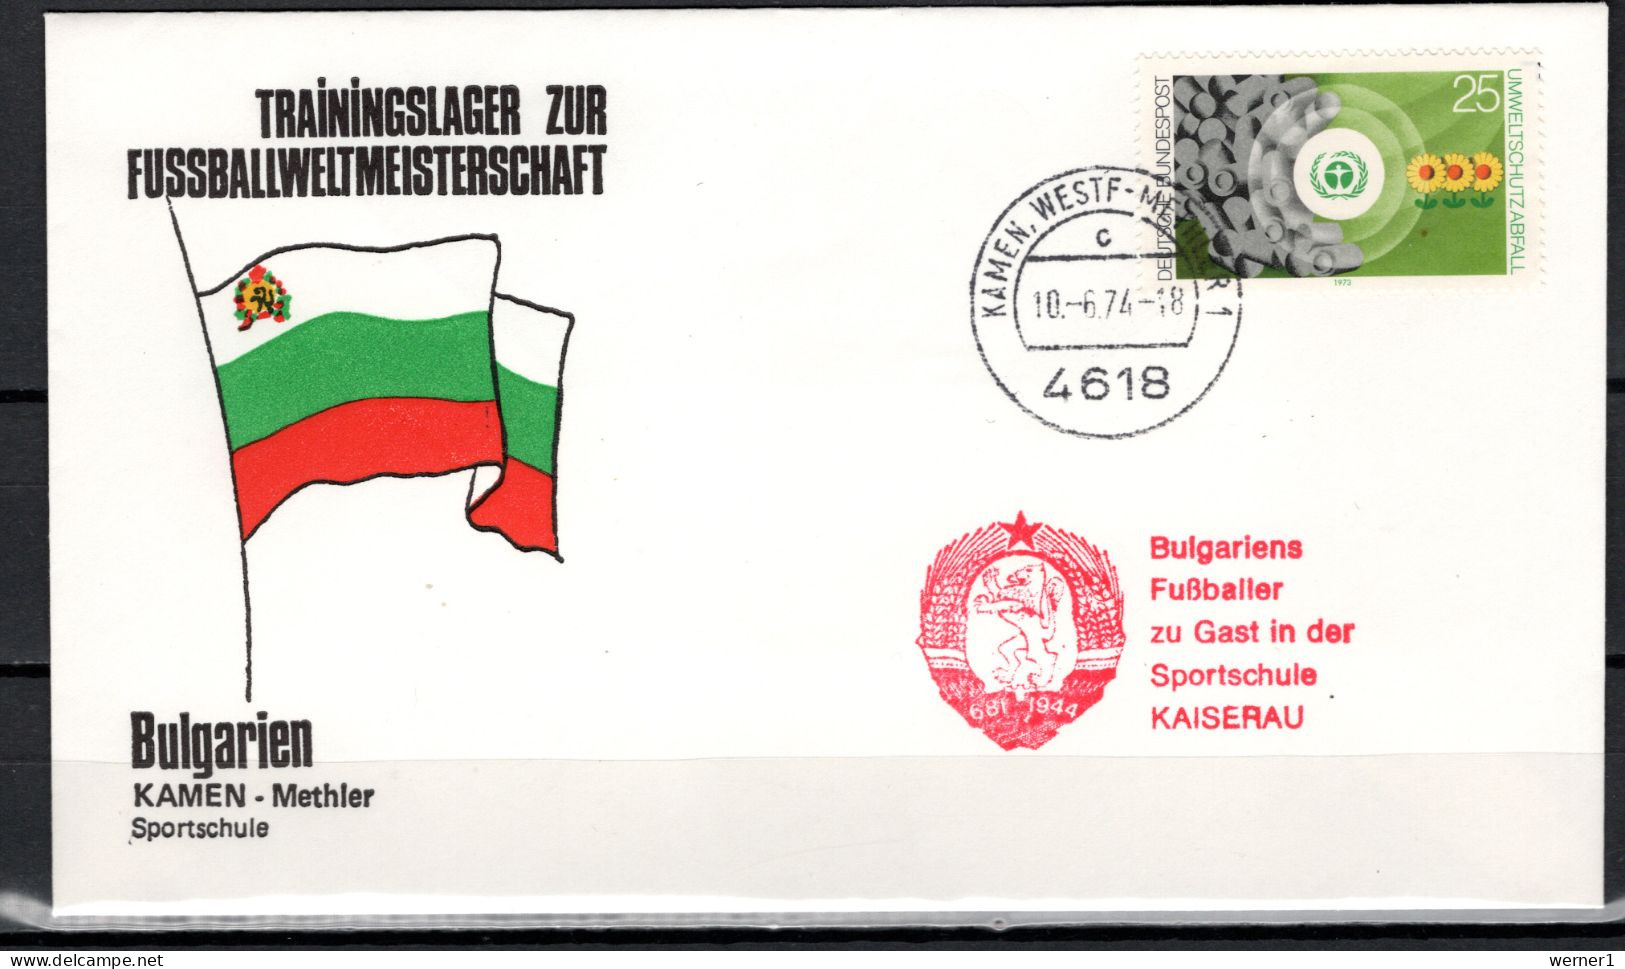 Germany 1974 Football Soccer World Cup Commemorative Cover, Bulgarian Training Camp - 1974 – West Germany